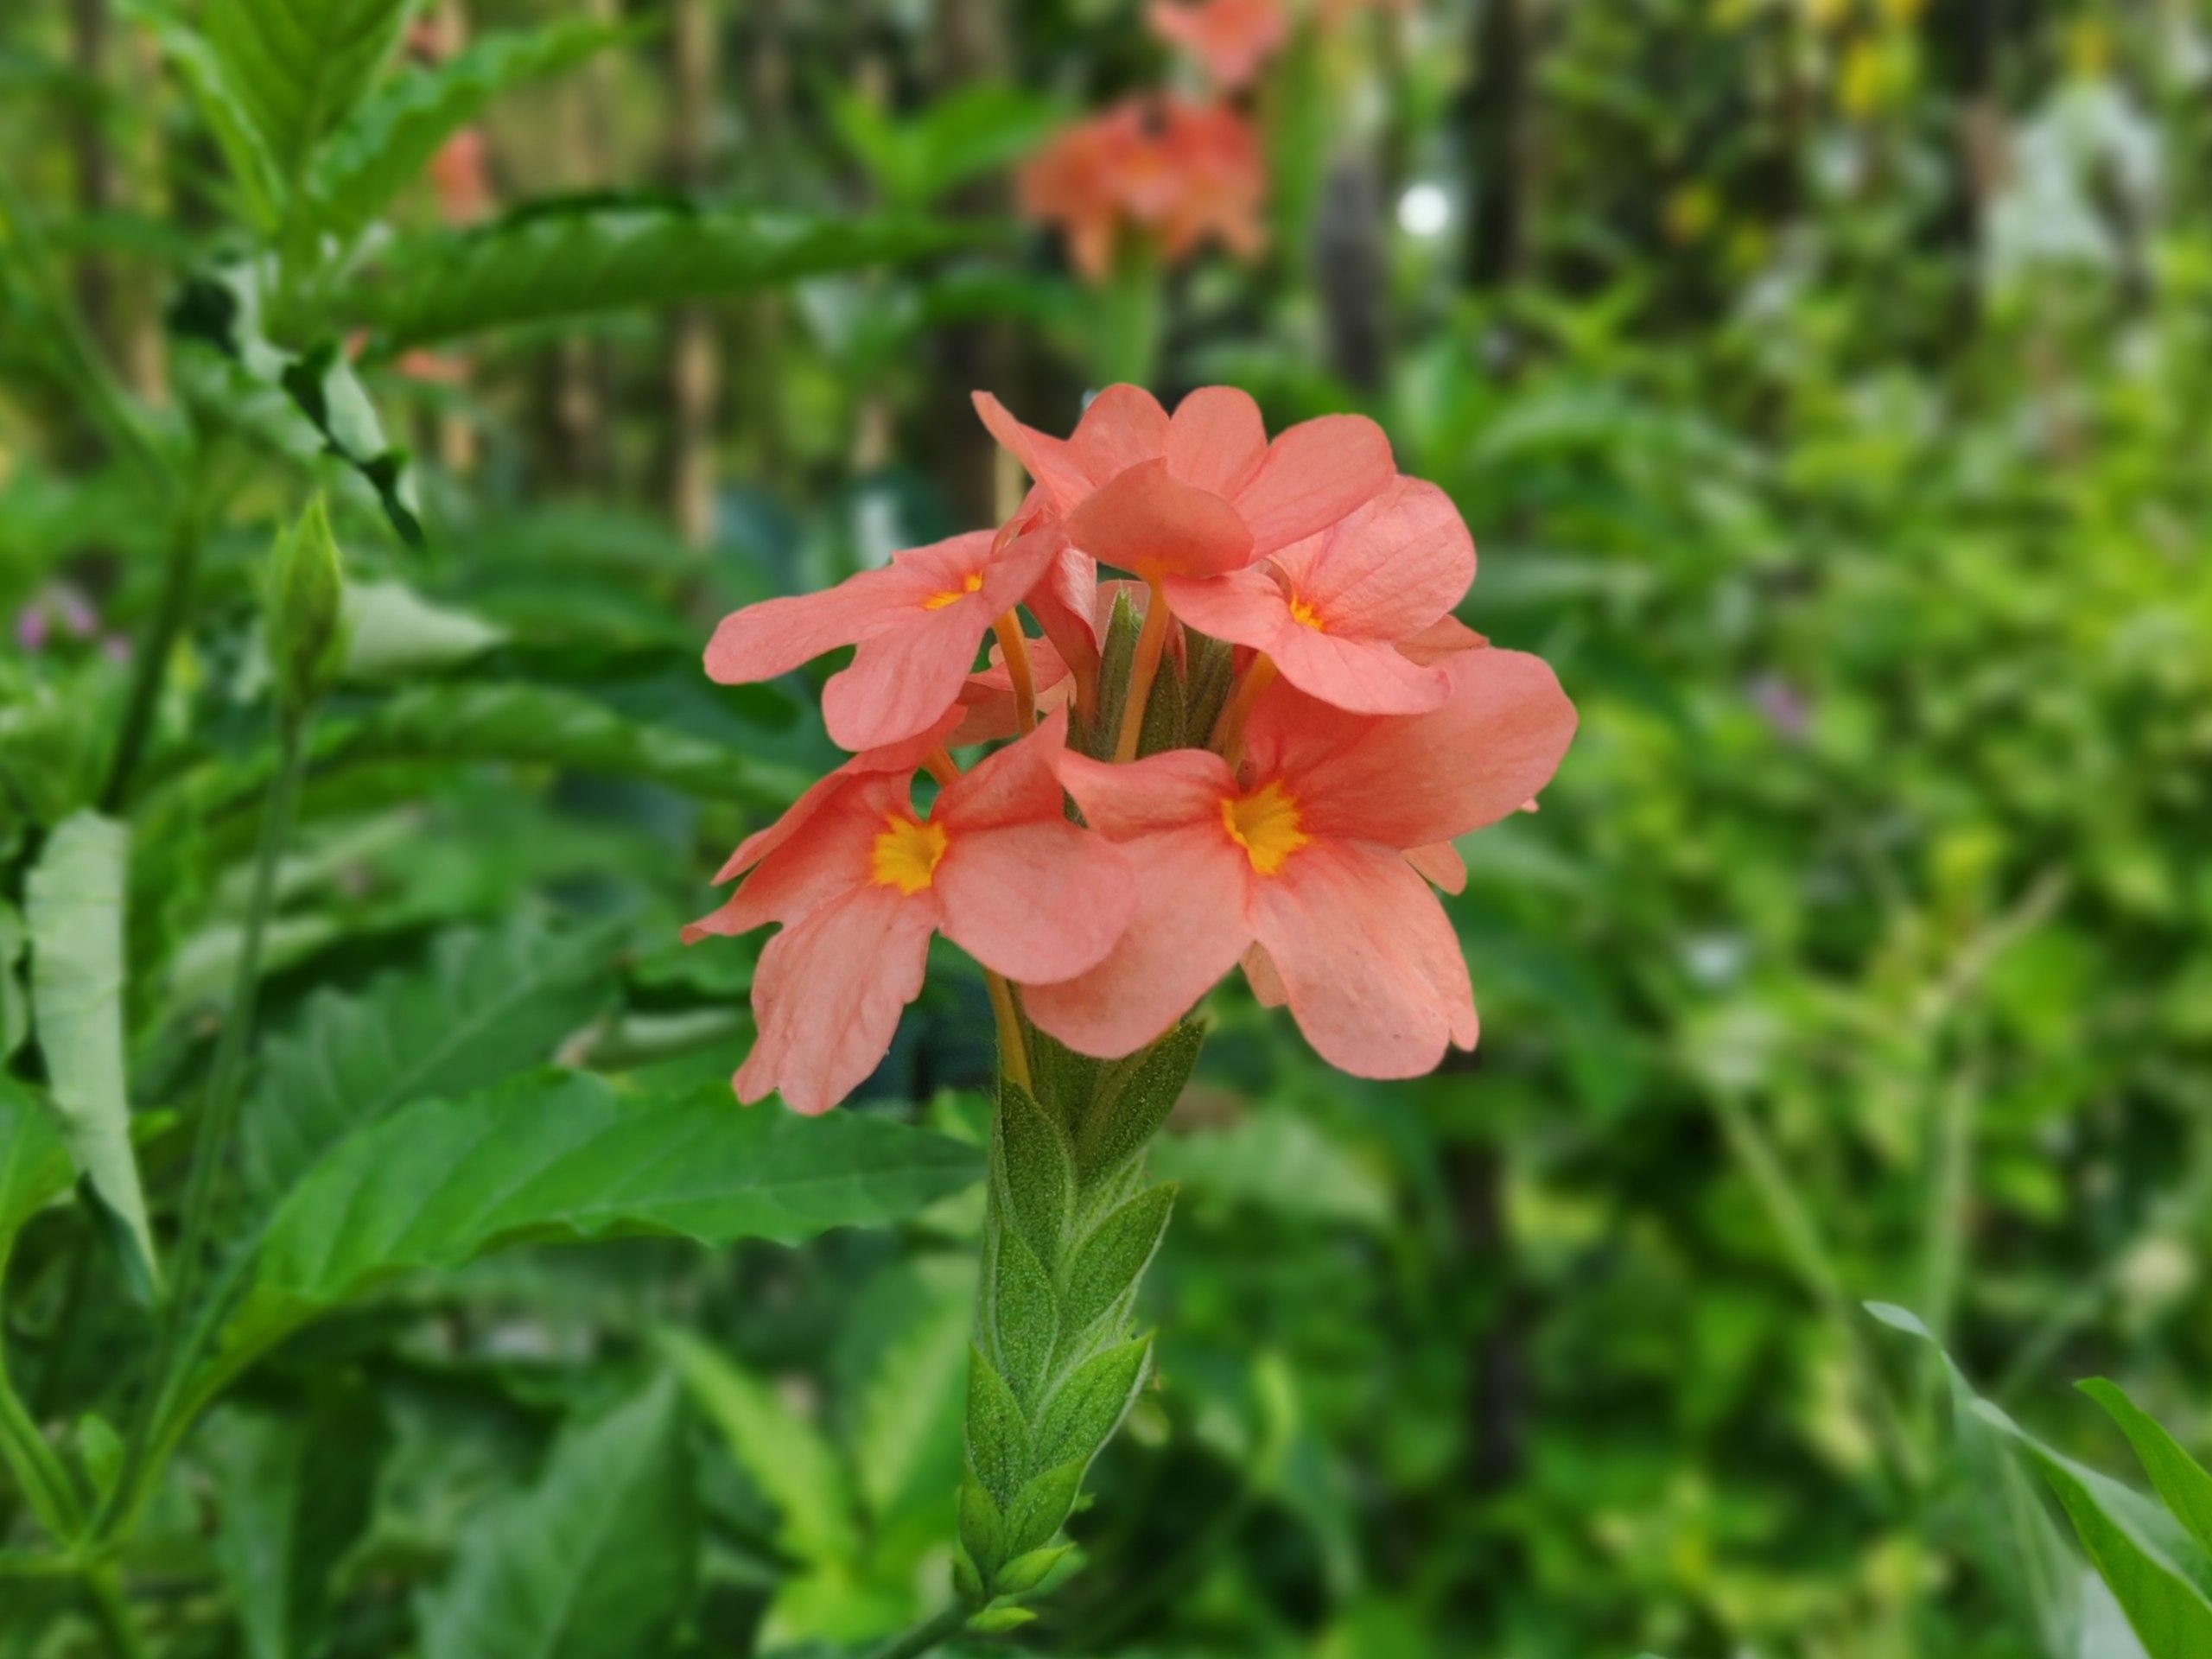 pink-orange flowers with yellow center, yellow-green stems and green leaves